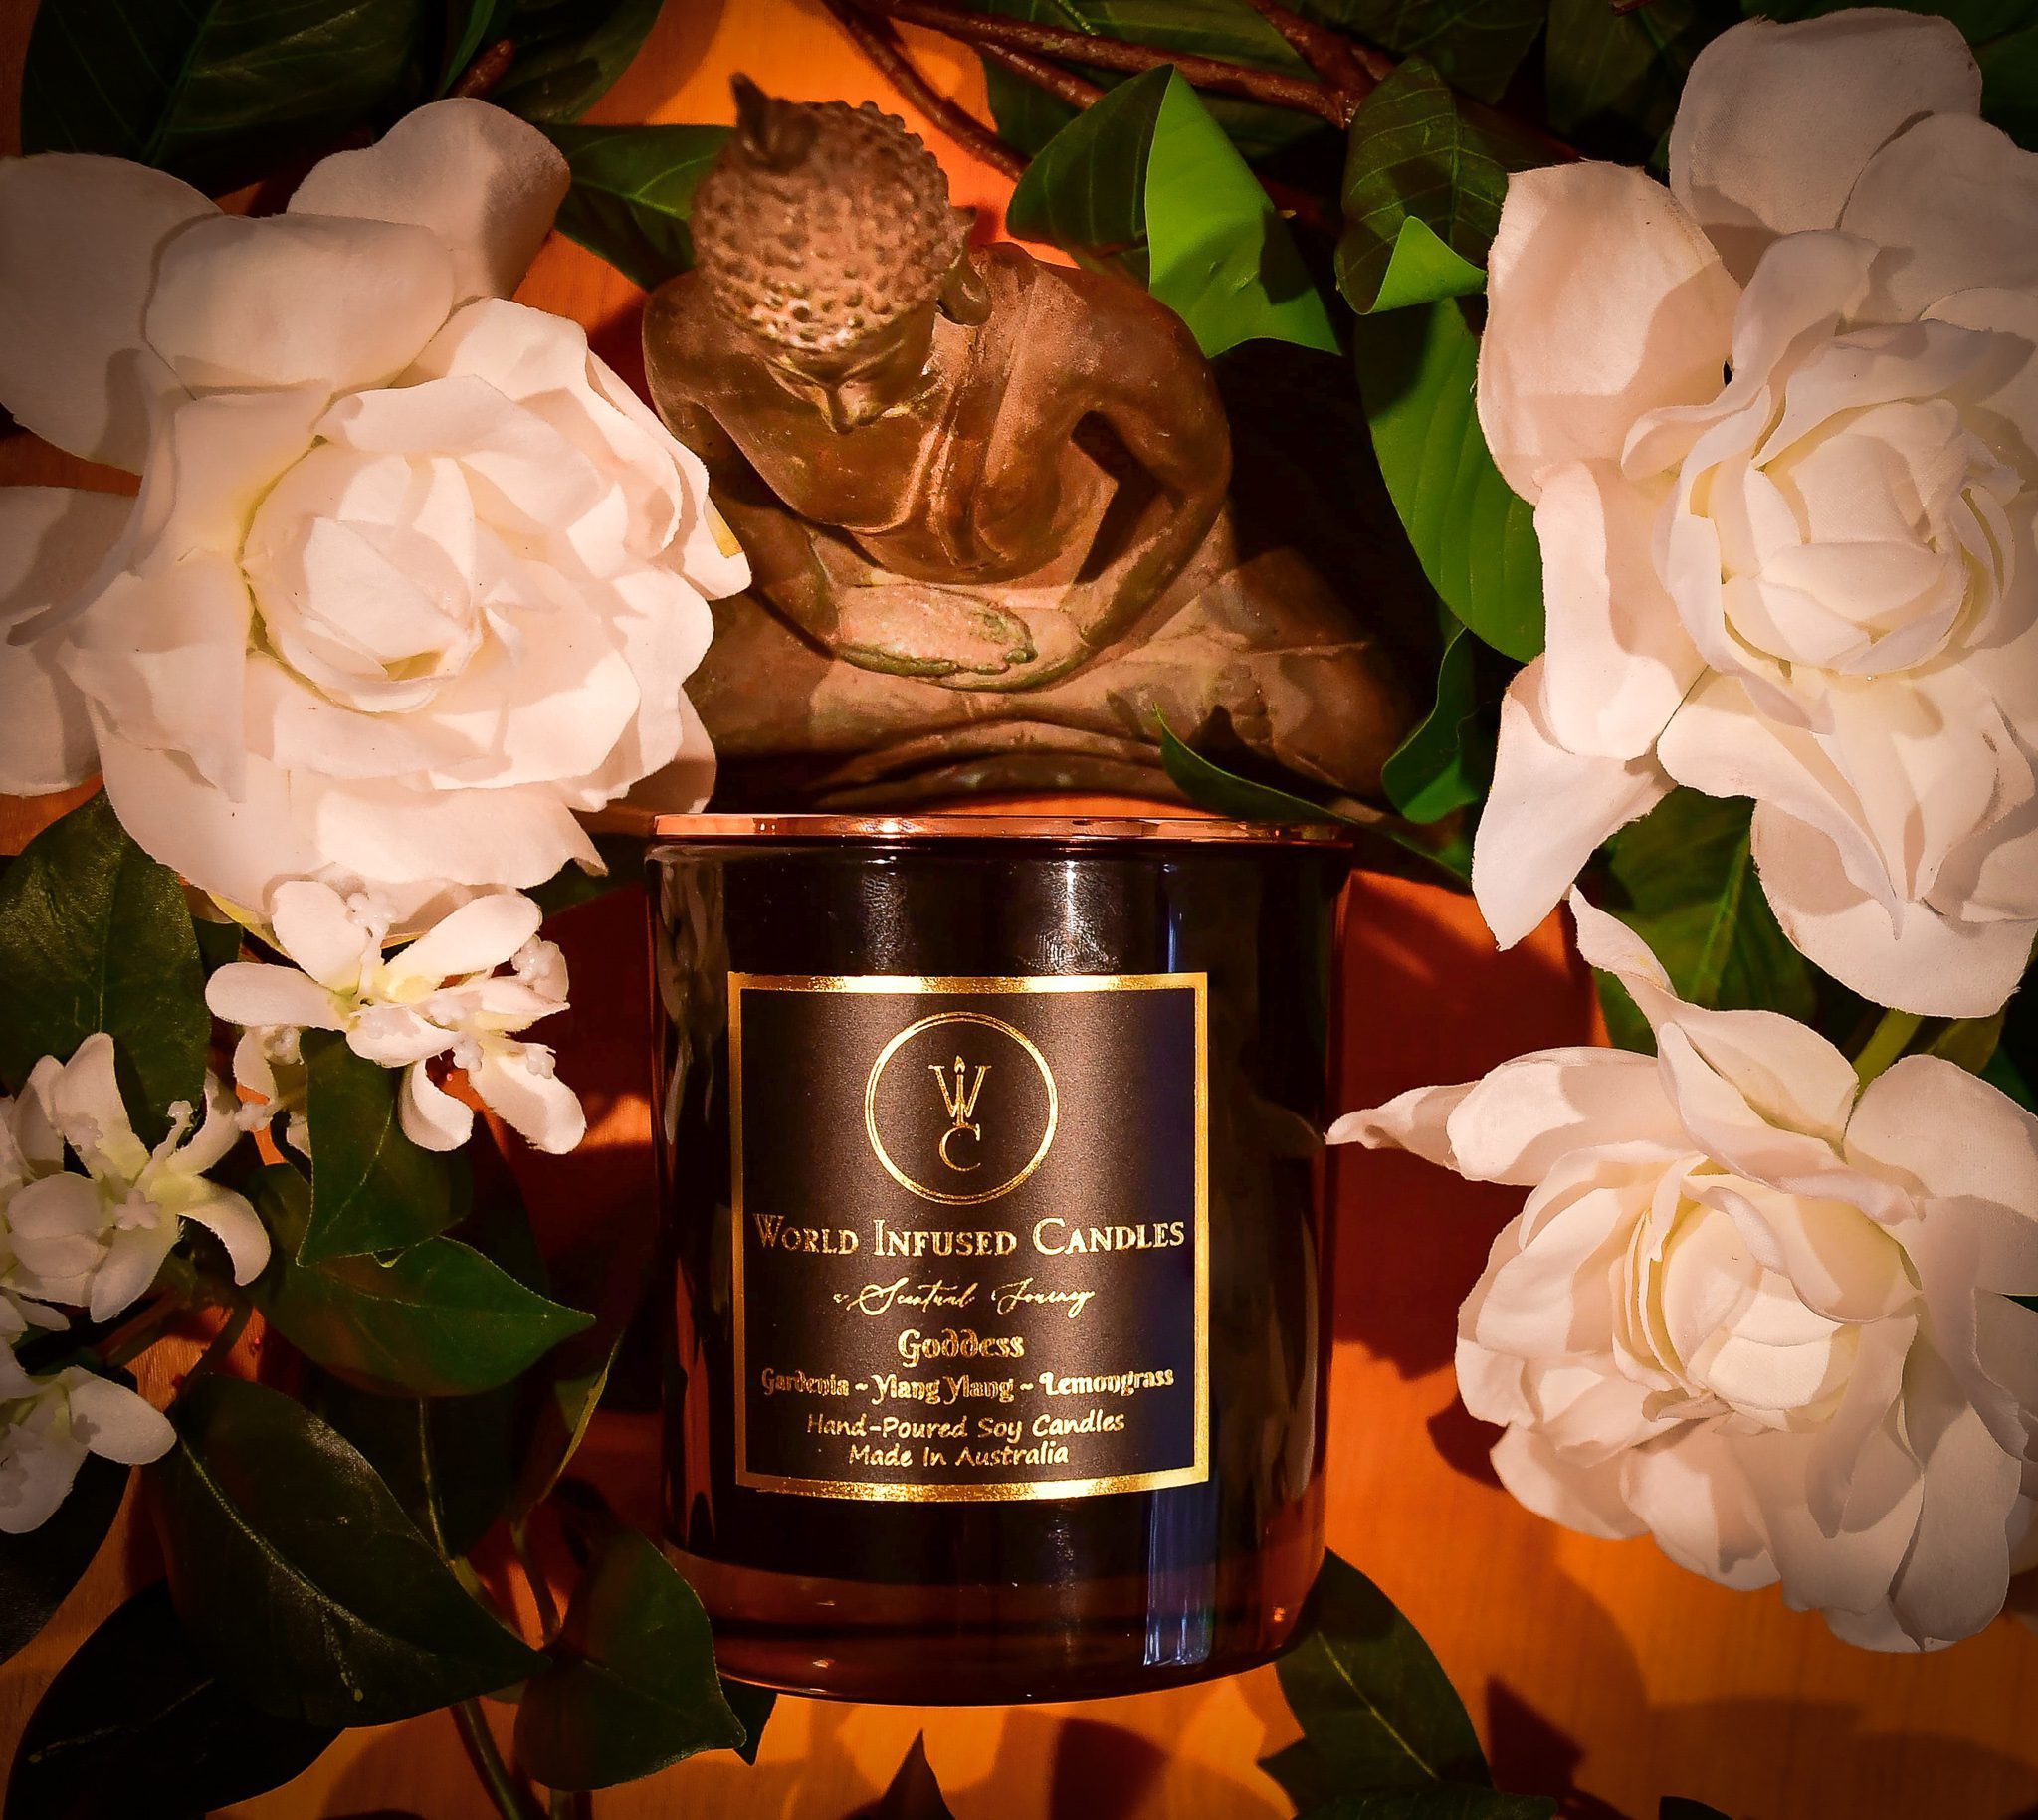 Goddess Candle top down in the center of Gardenia flowers